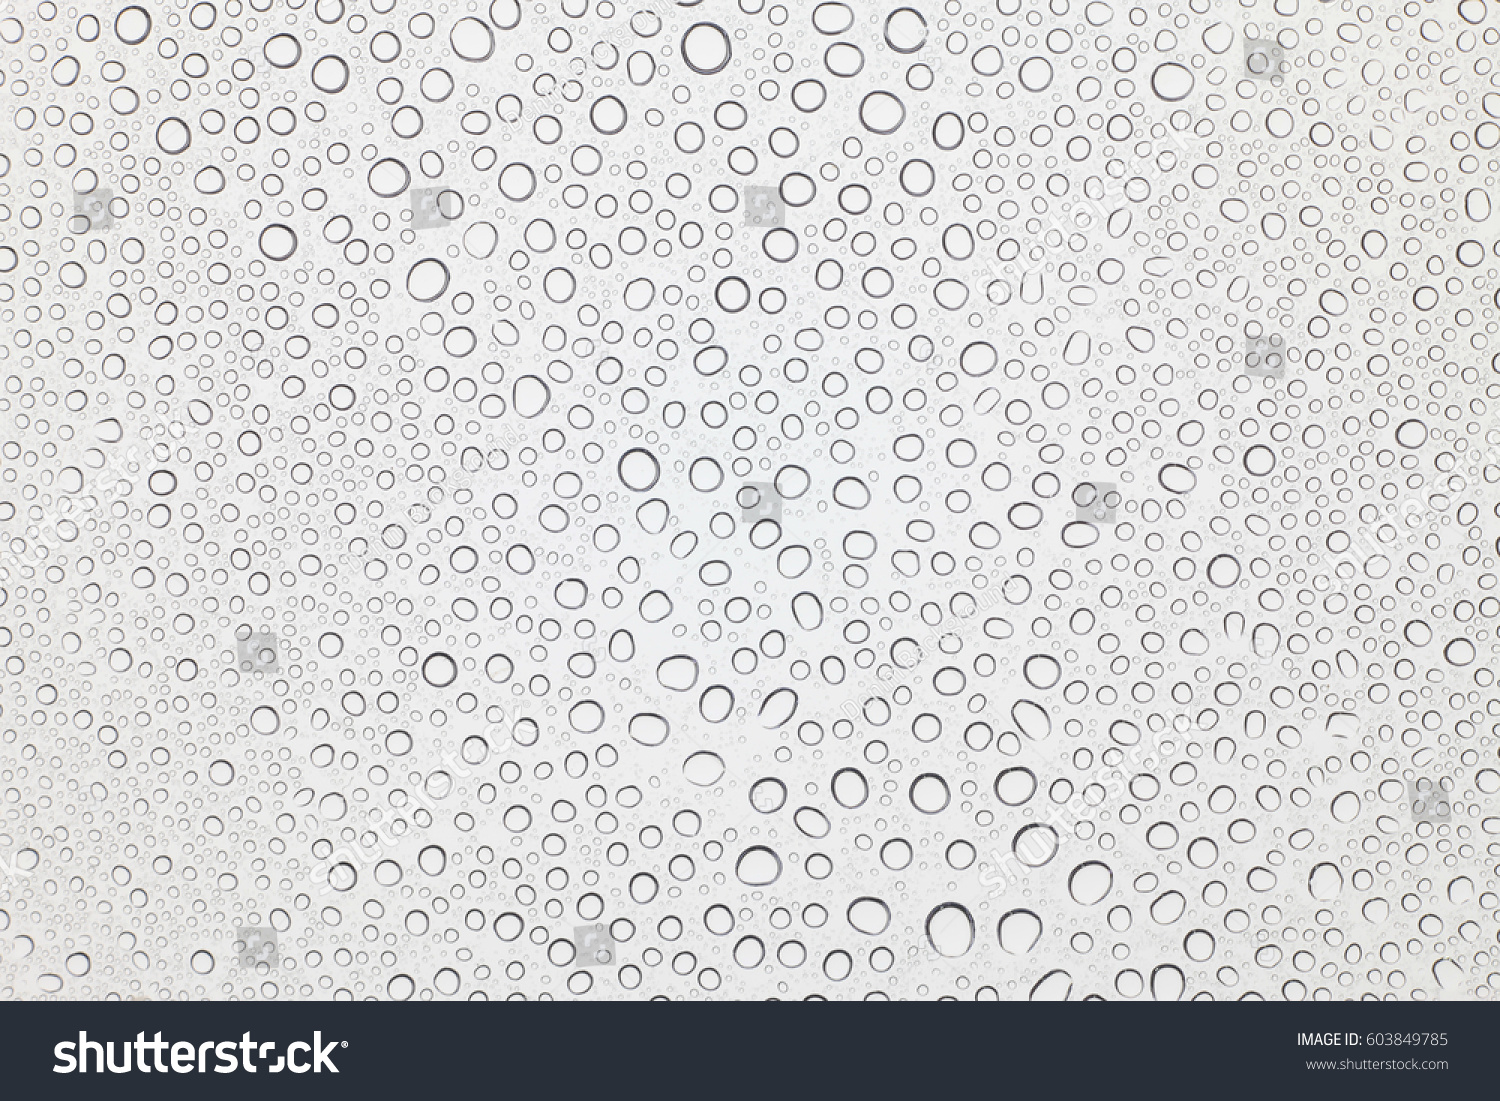 Water drops on glass, Rain droplets on glass background. #603849785